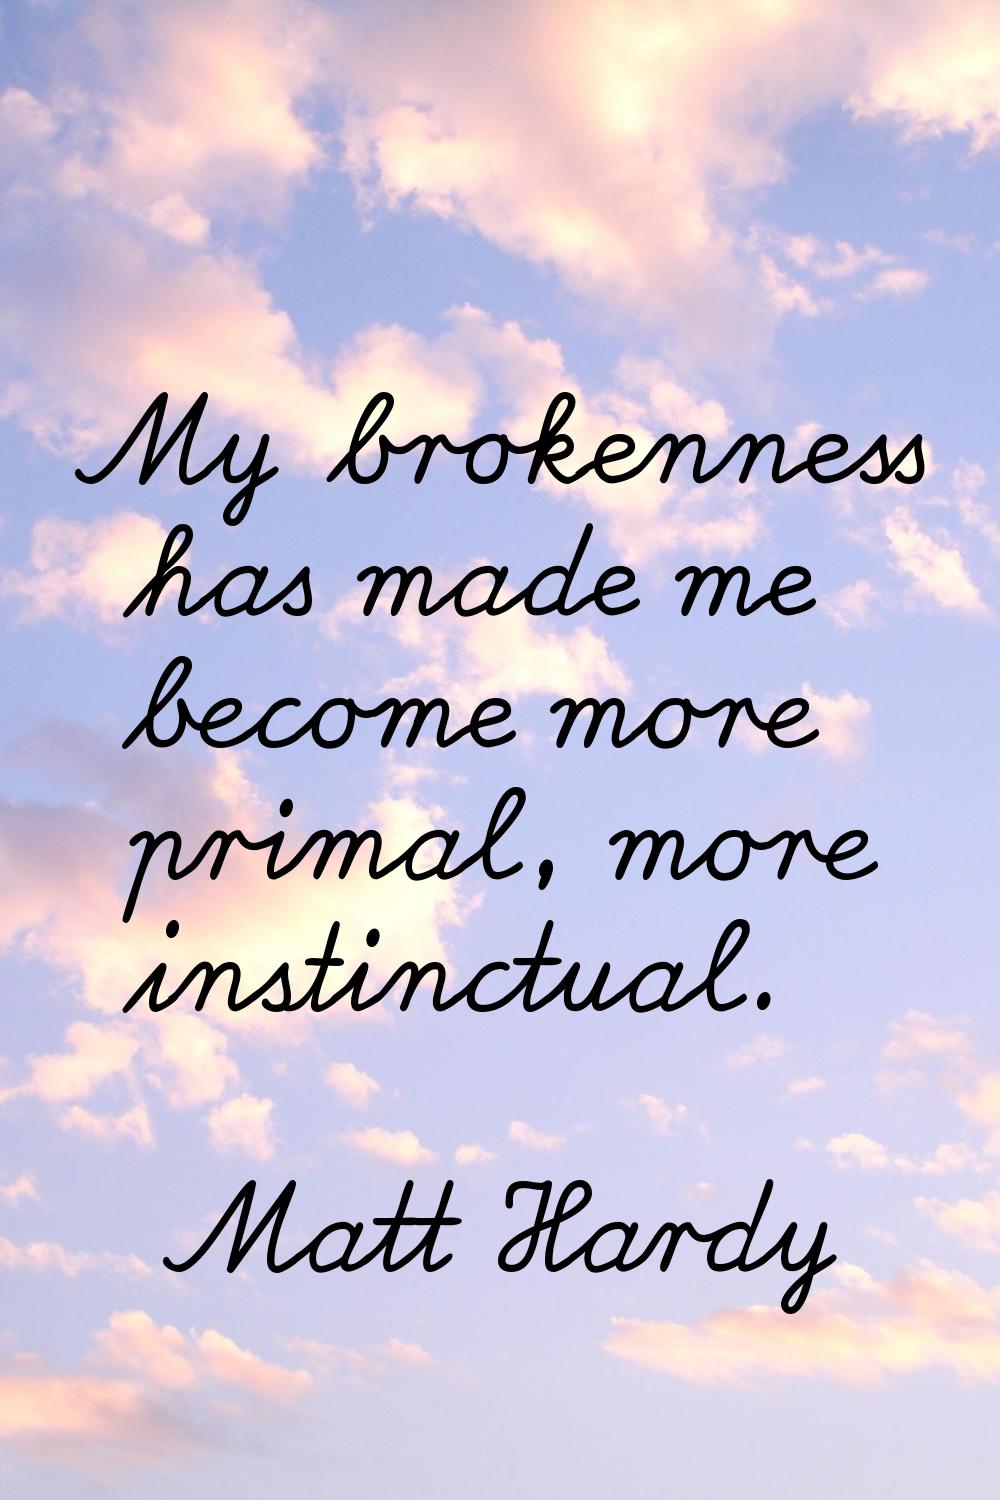 My brokenness has made me become more primal, more instinctual.